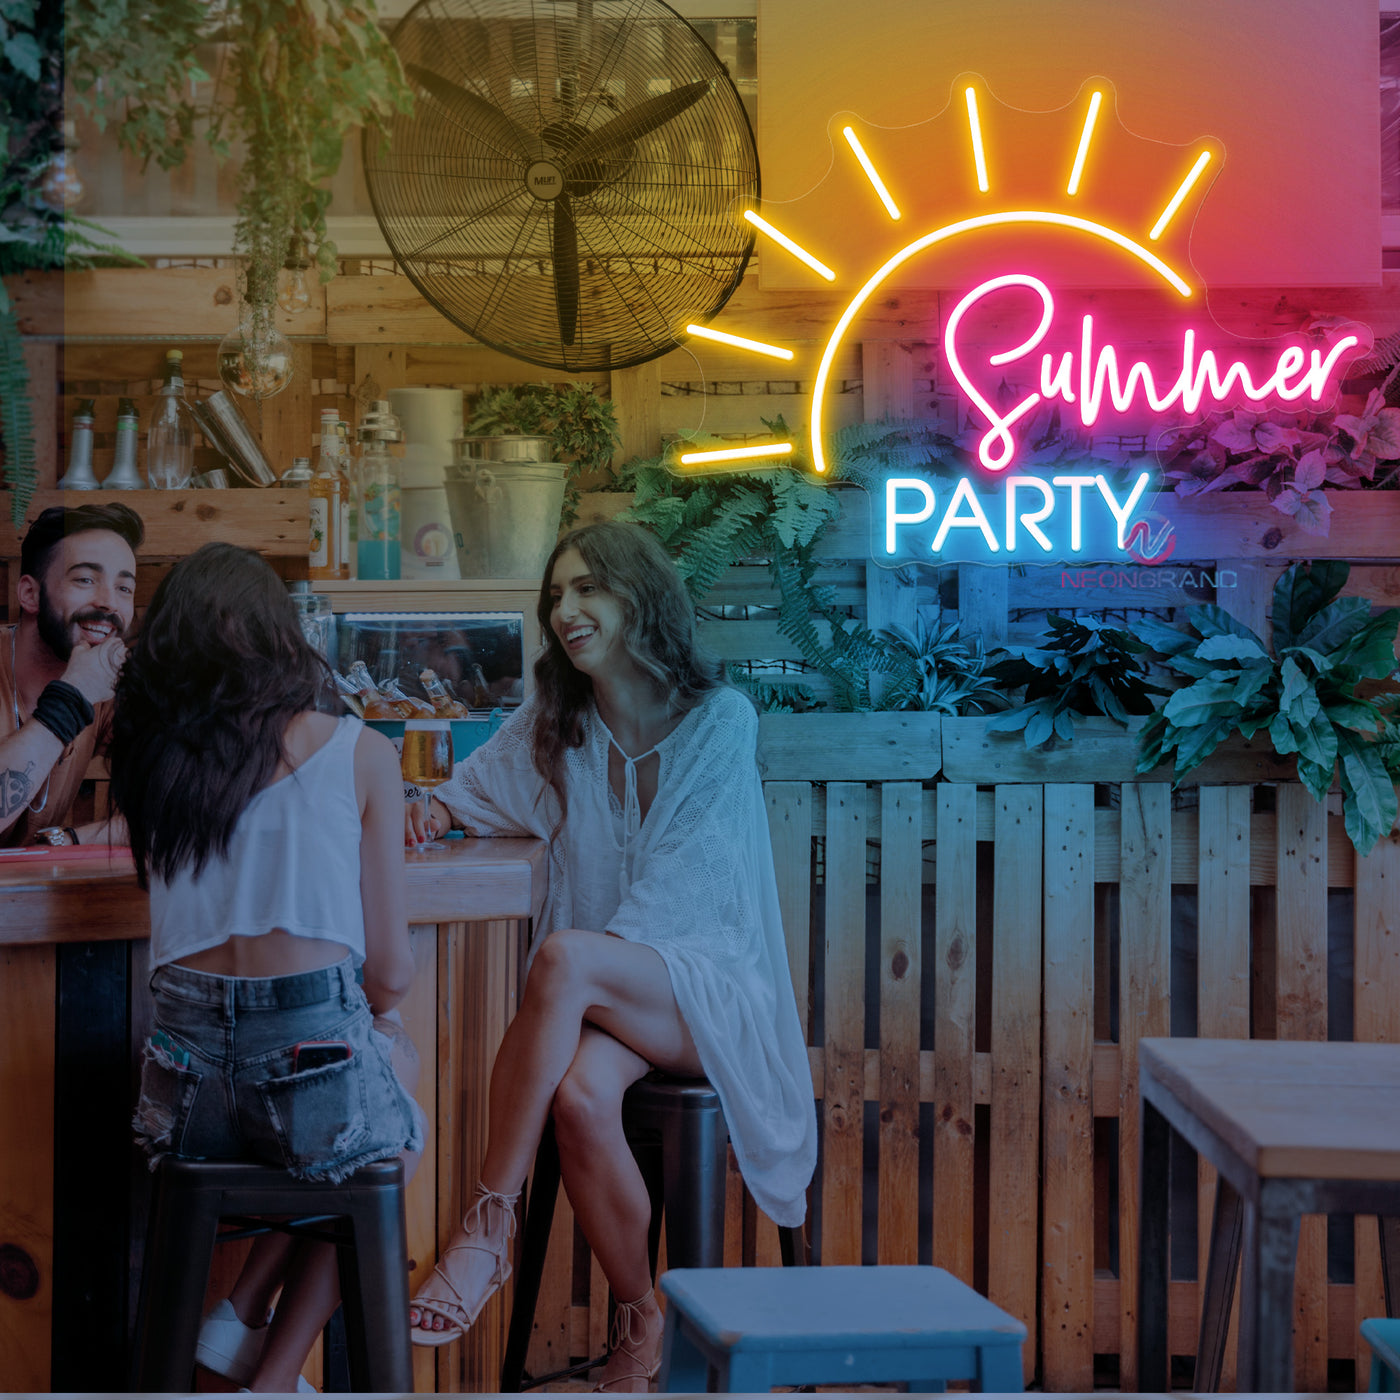 Summer Party Neon Sign Led Light 2